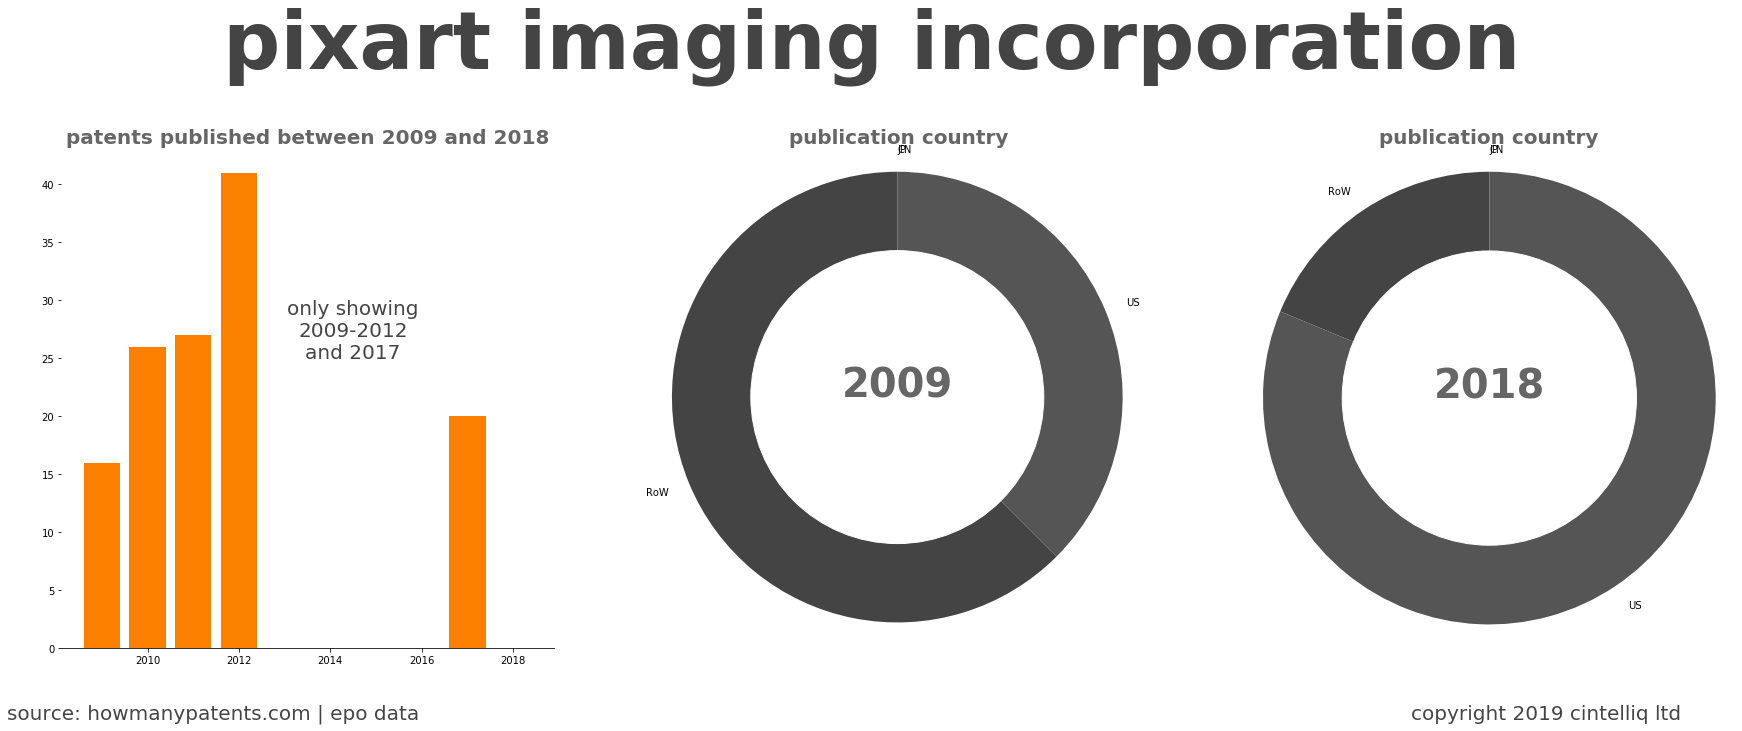 summary of patents for Pixart Imaging Incorporation